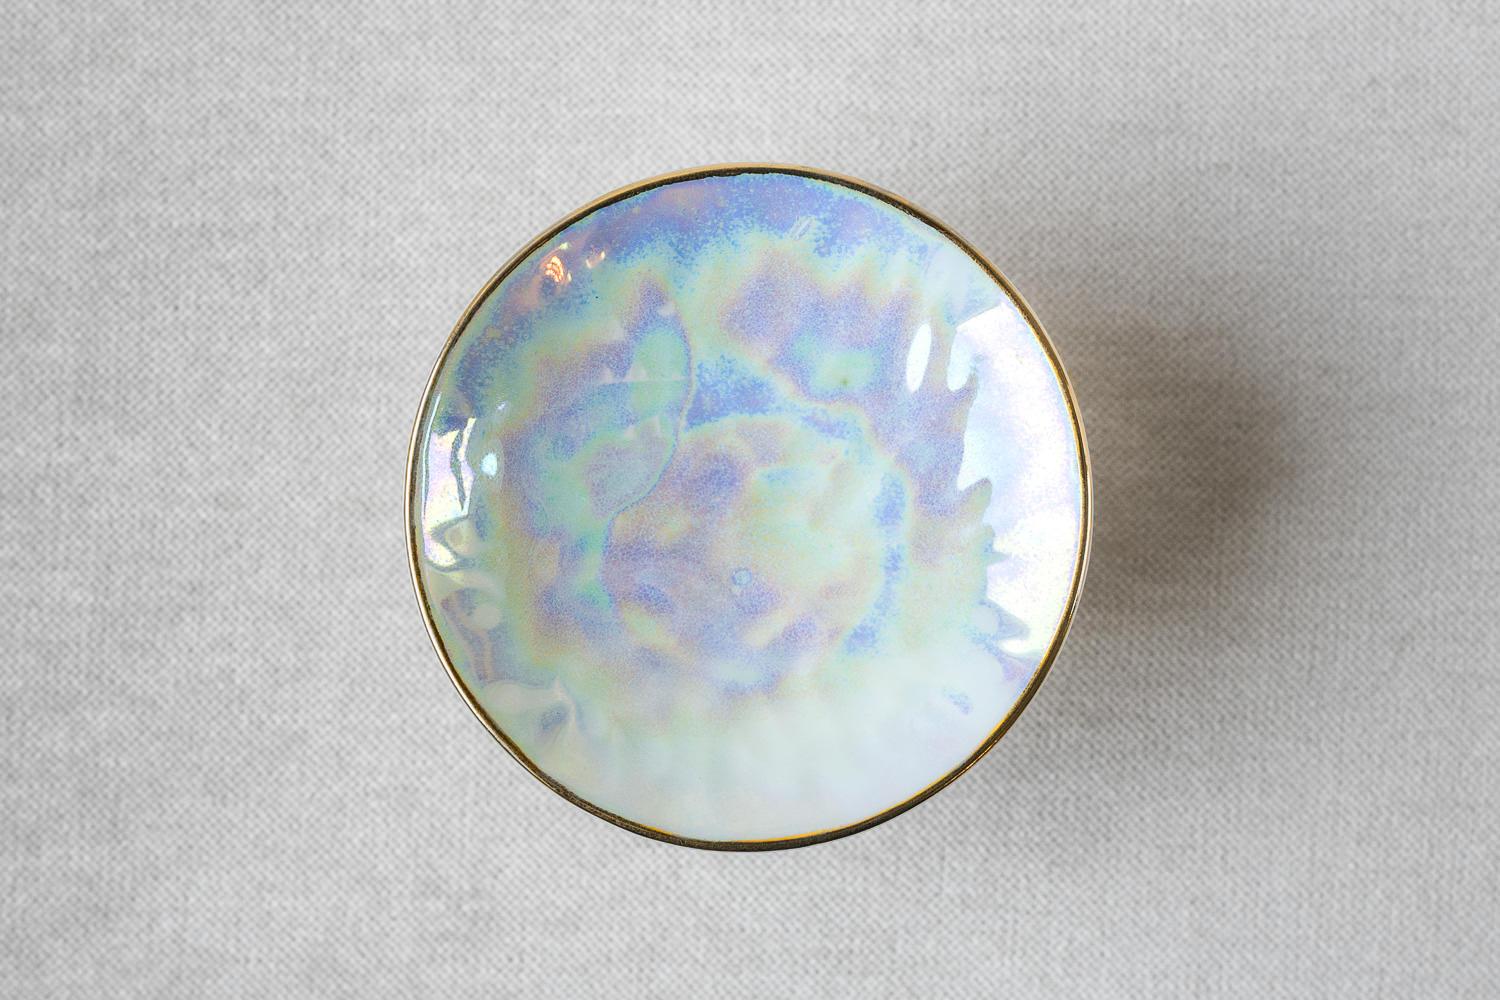 • small porcelain side dish
• 7,5 cm ø x 3,5 cm
• perfect for a sexy amuse-bouche, a pre-dessert or side dish
• also works for the essential coarse sea salt on the table
• with a glamorous iridescent glaze, textured bottom
• and a very